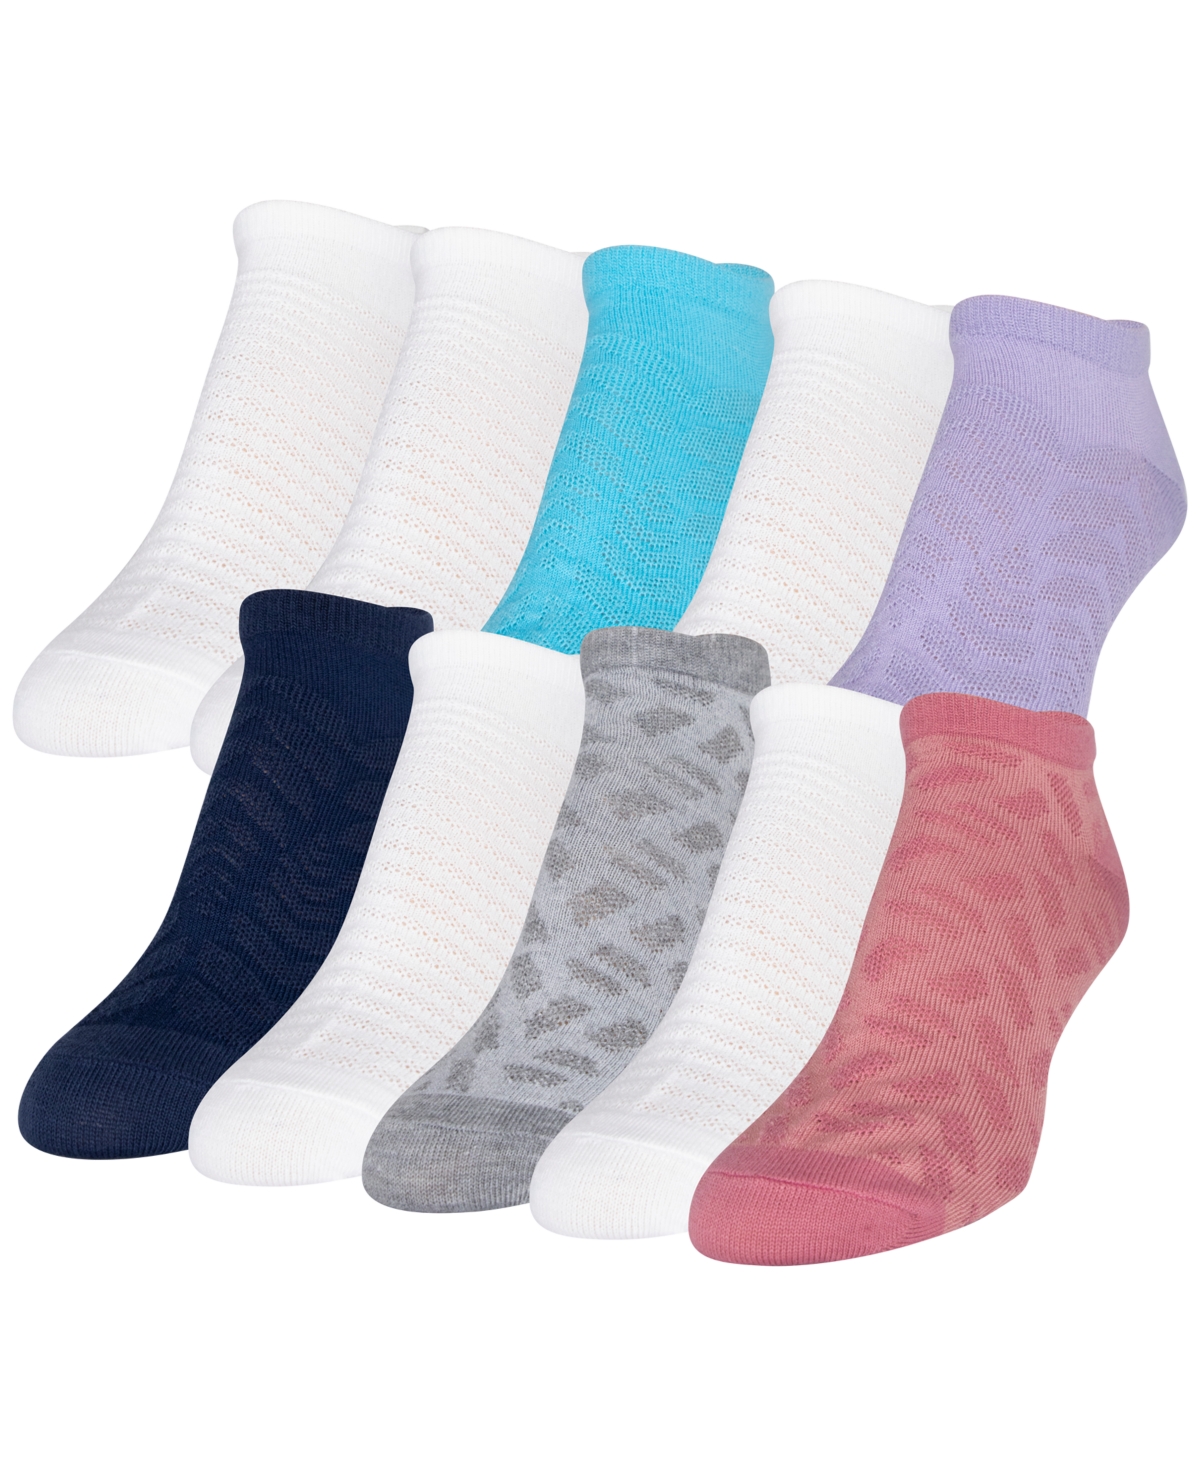 Women's 10-Pack Casual Lightweight With Mesh No-Show Socks - White